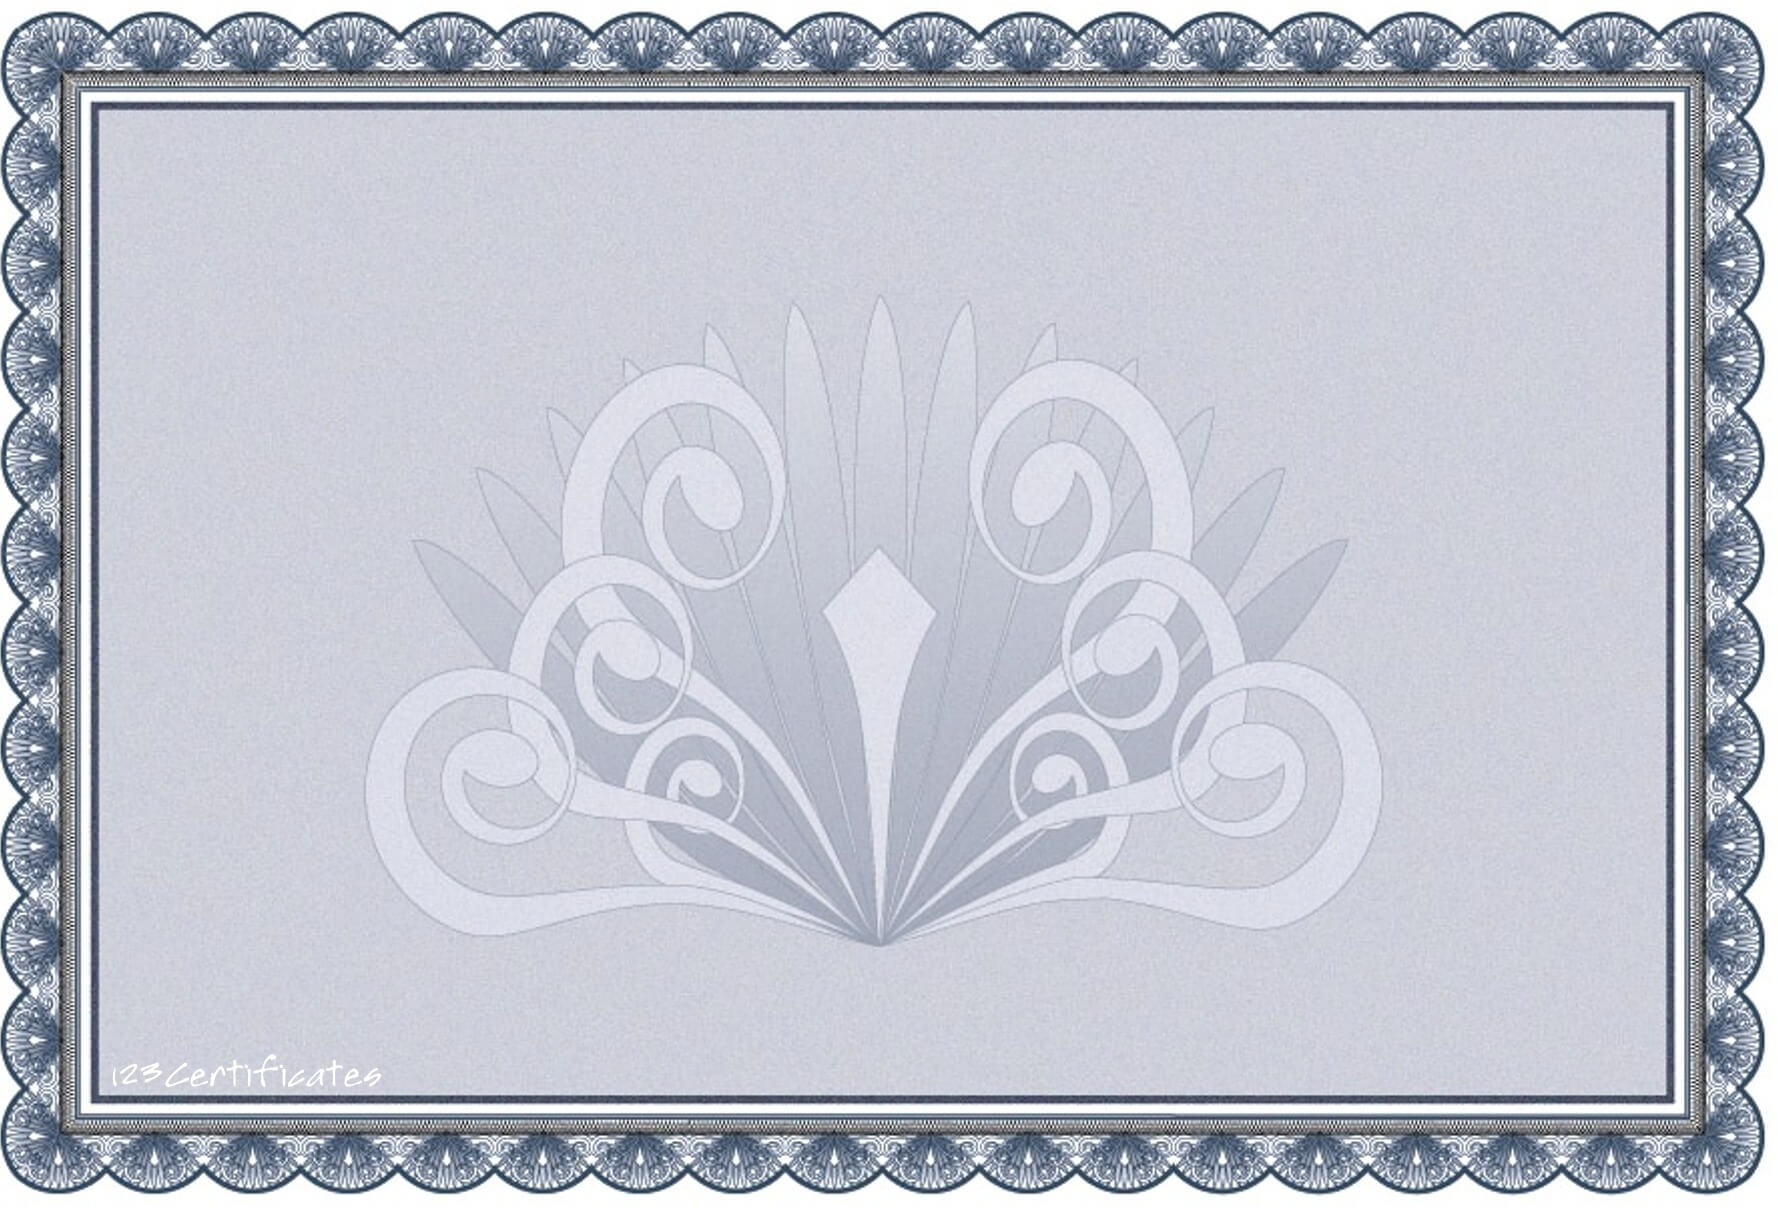 Free Certificate Borders To Download Throughout Free Printable Certificate Border Templates